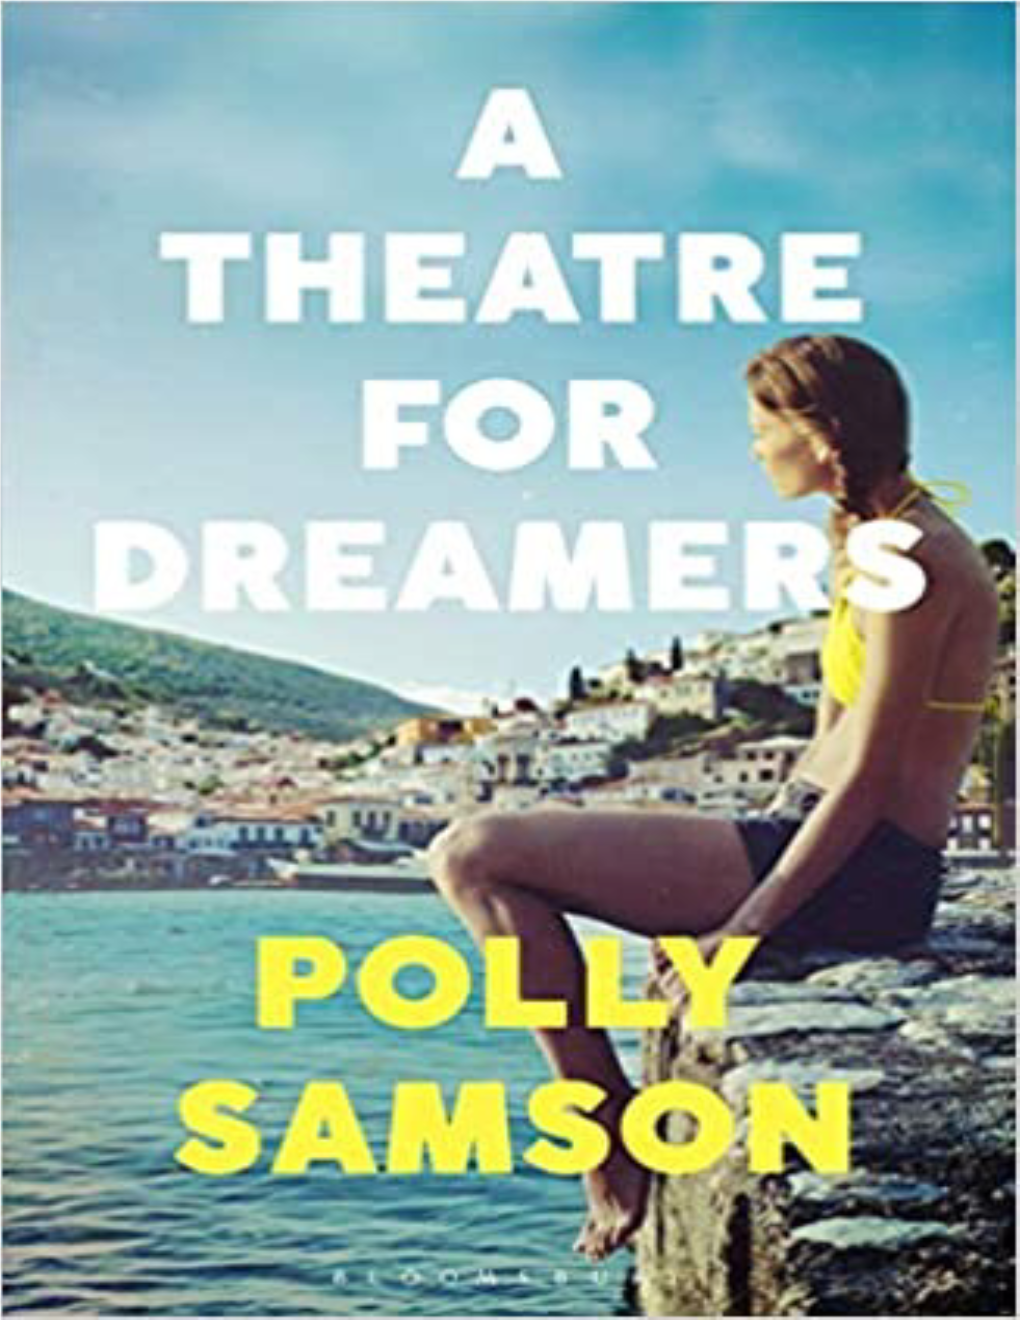 A THEATRE for DREAMERS for Romany by the SAME AUTHOR the Kindness Perfect Lives out of the Picture Lying in Bed Contents